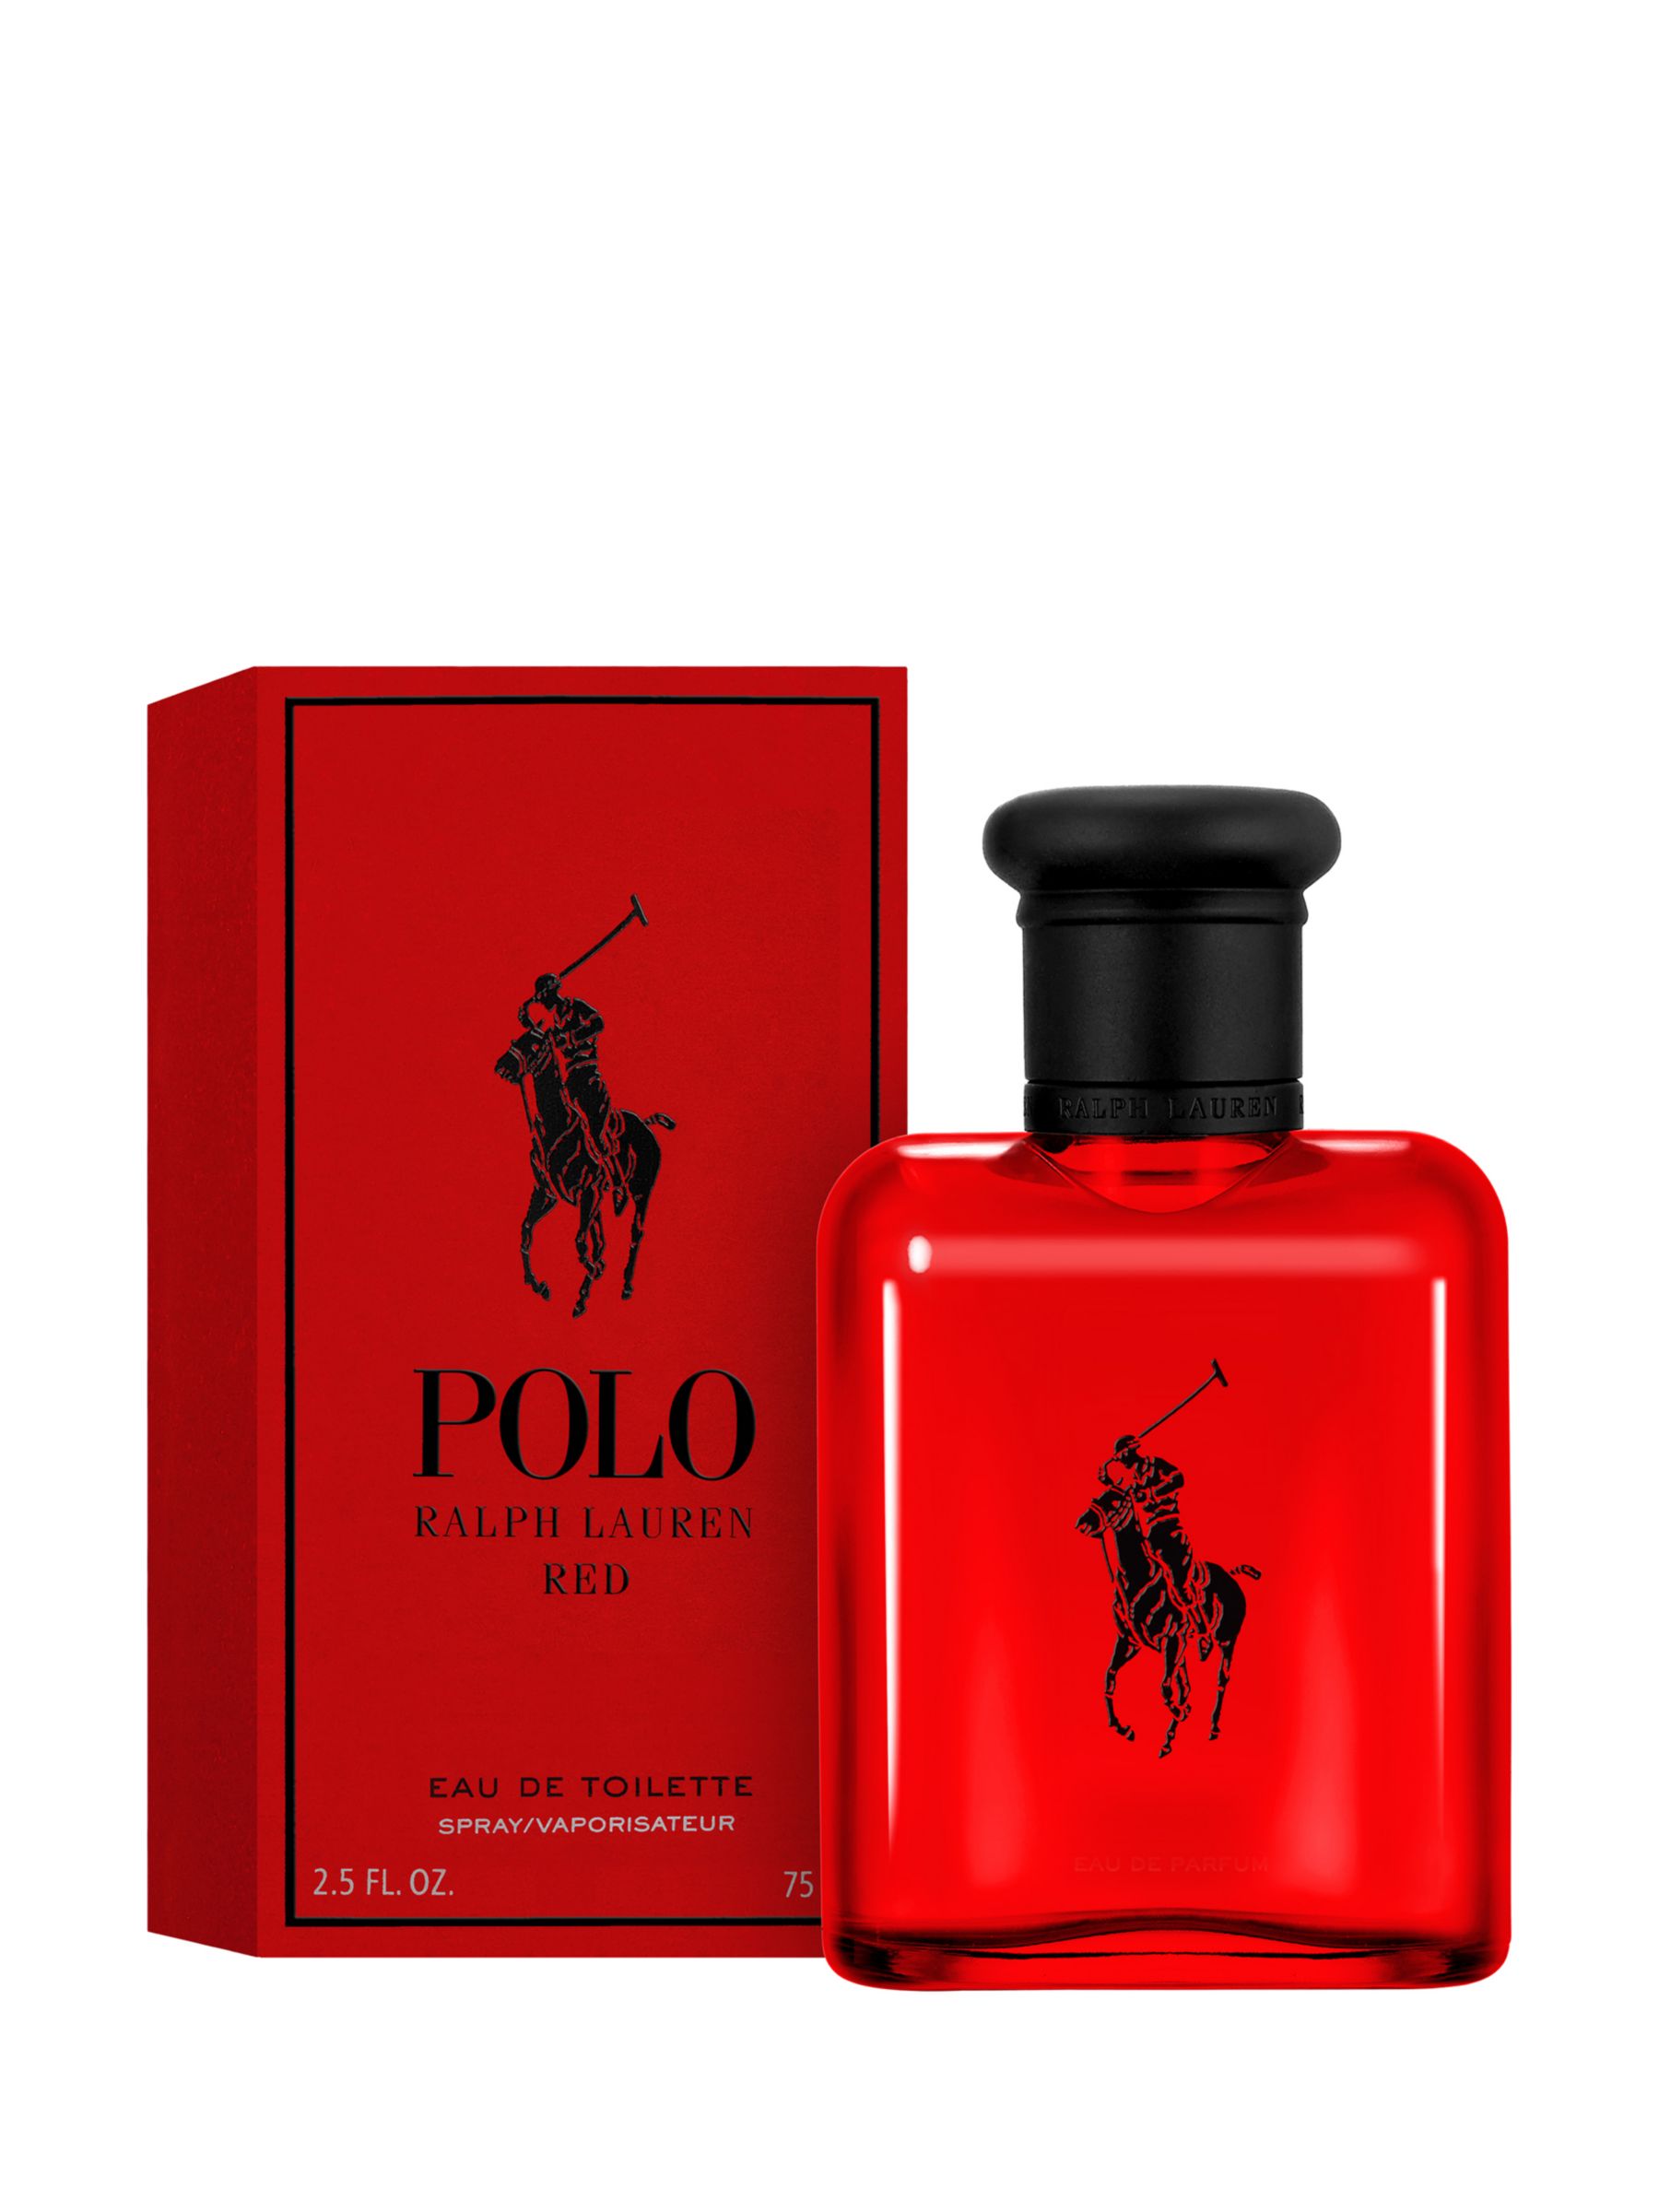 polo red small bottle